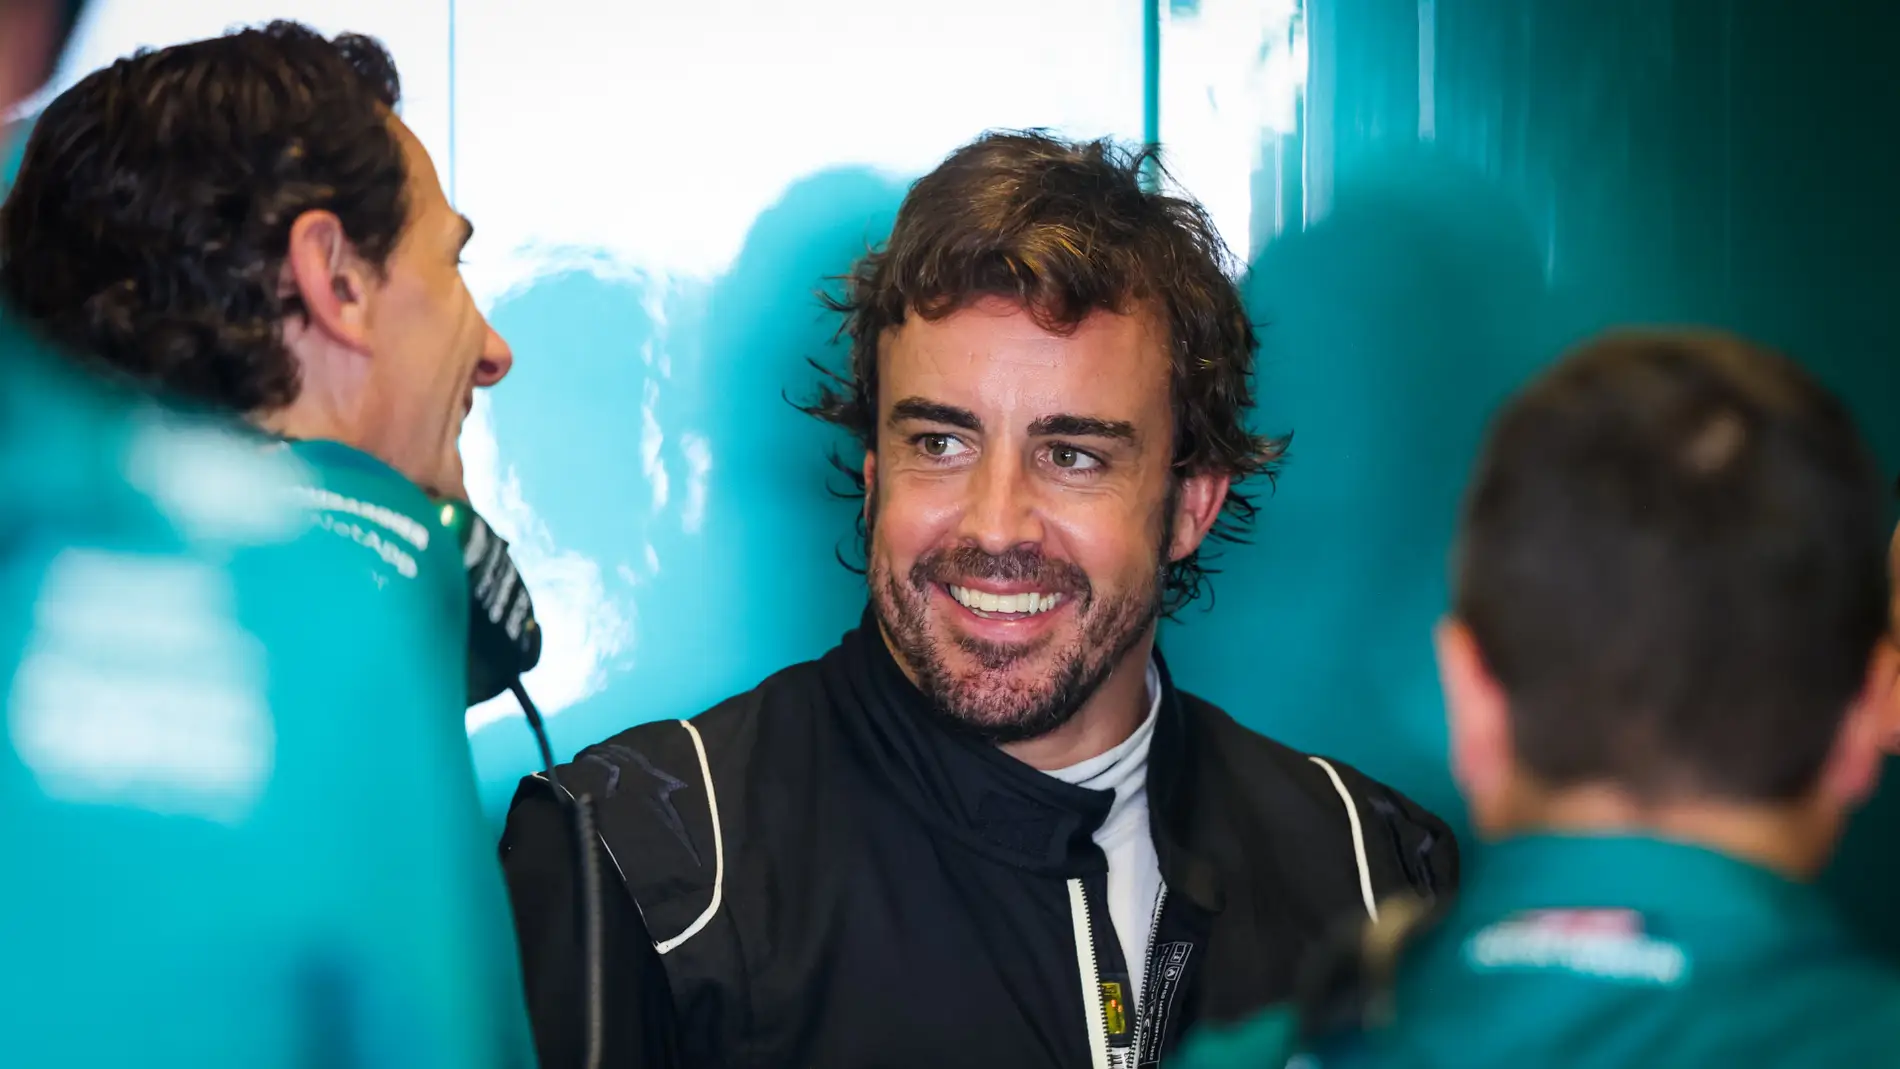 https://image.ondacero.es/clipping/cmsimages02/2023/02/13/13151D94-8B4D-447E-A7A2-18AD96C4996A/fernando-alonso-equipo-aston-martin_98.jpg?crop=1920,1080,x0,y29&width=1900&height=1069&optimize=high&format=webply